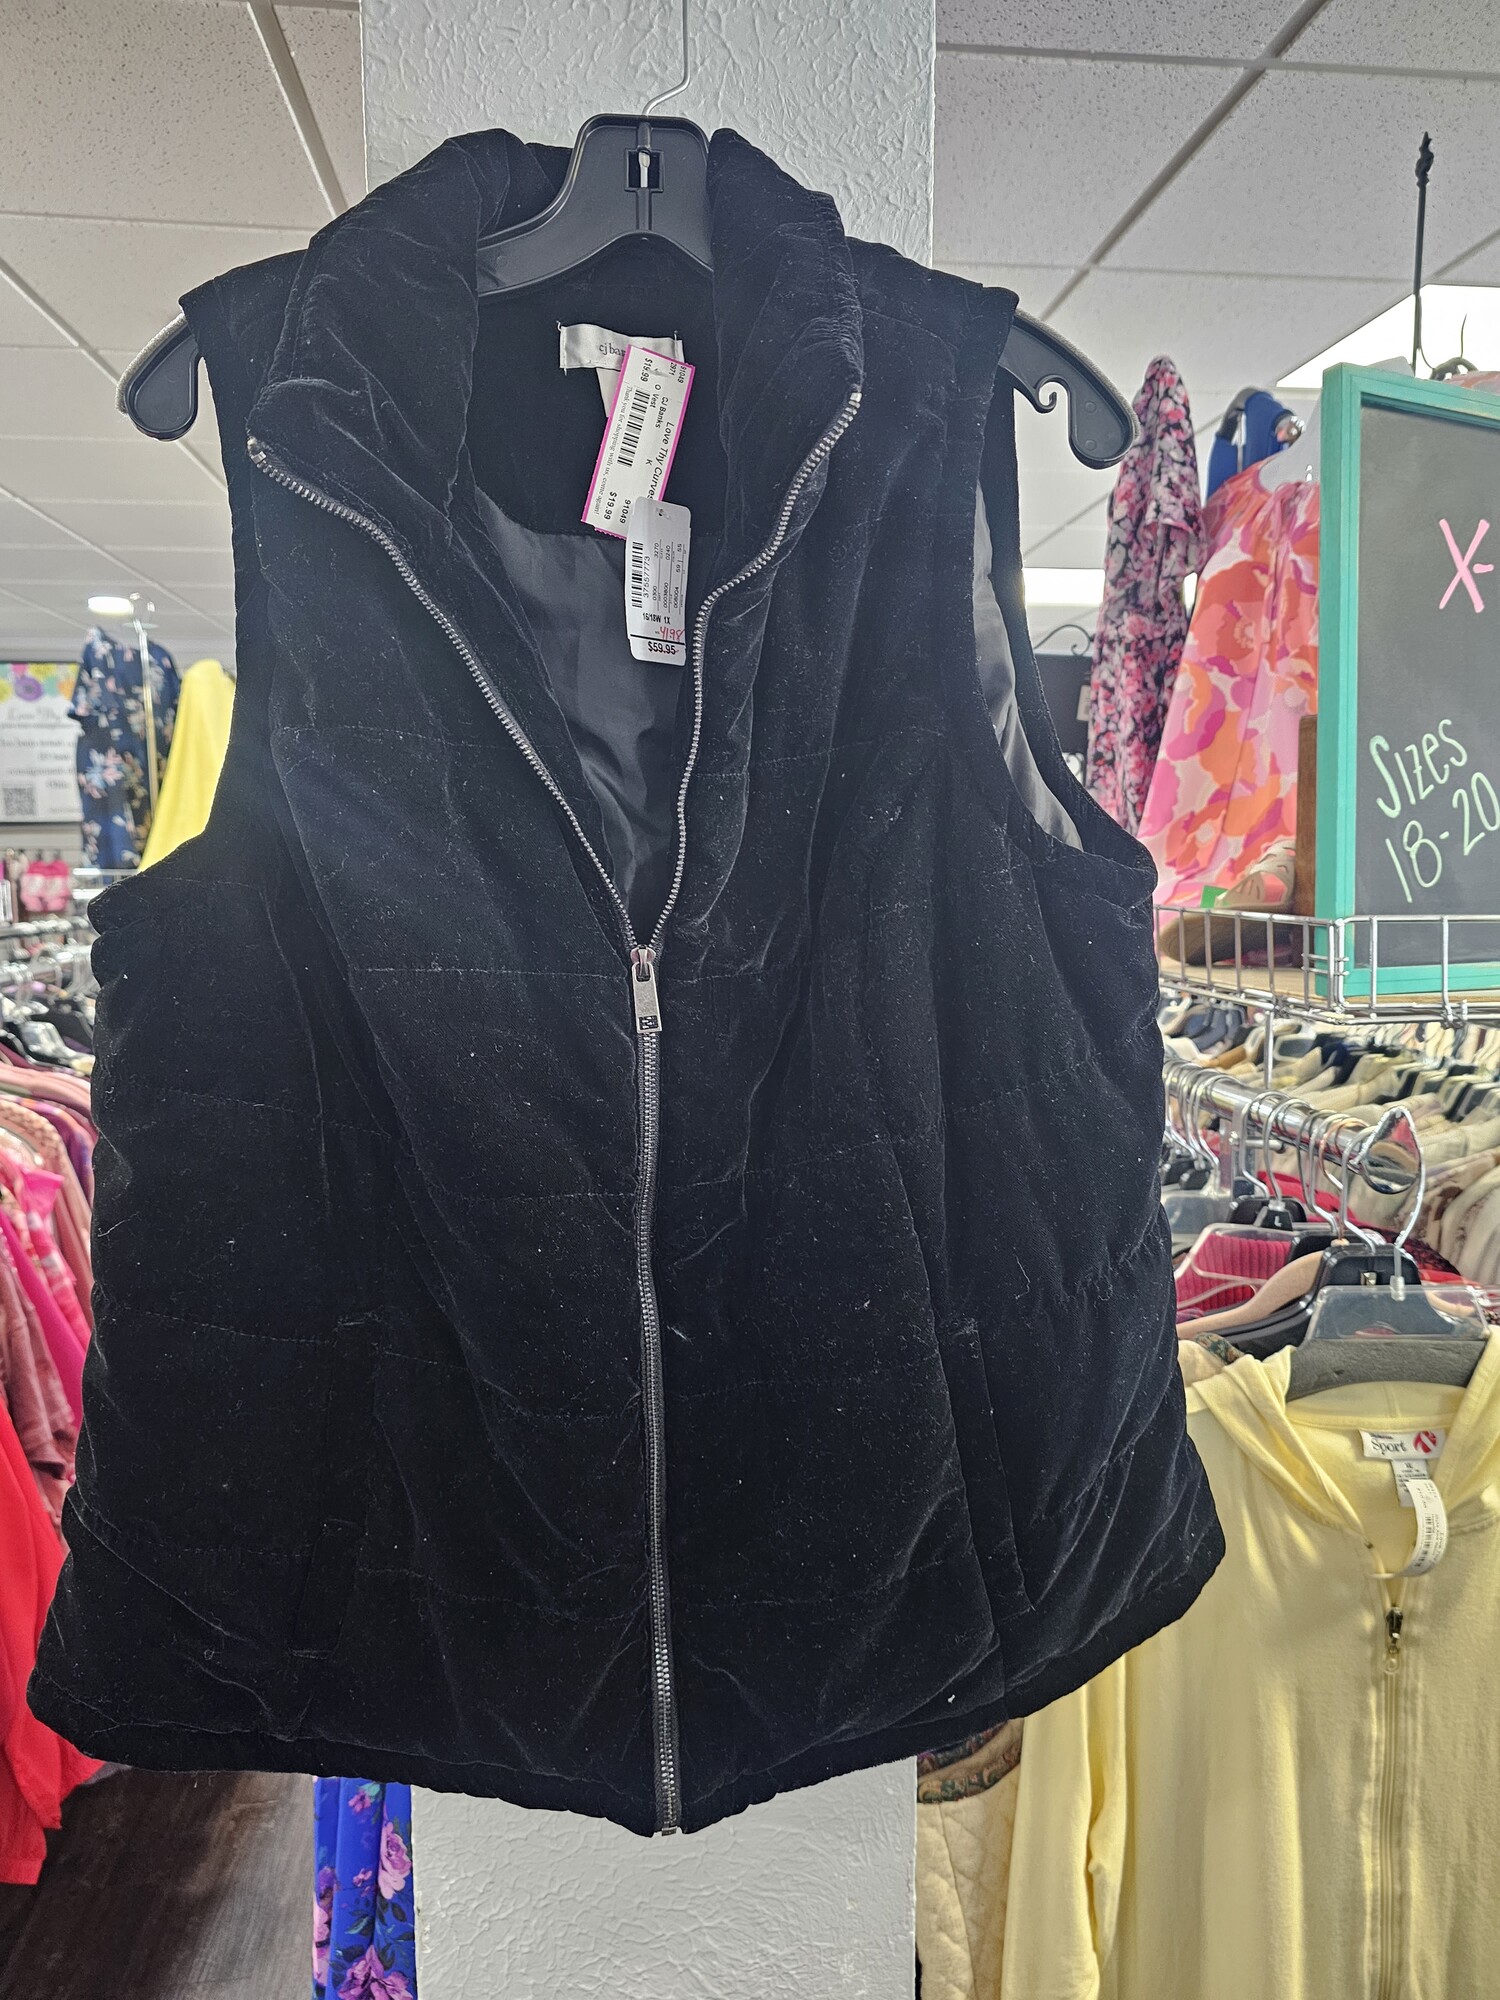 Brand new with tags and retails for $60. This is a classy sided puffer vest in a velvety zip up front.